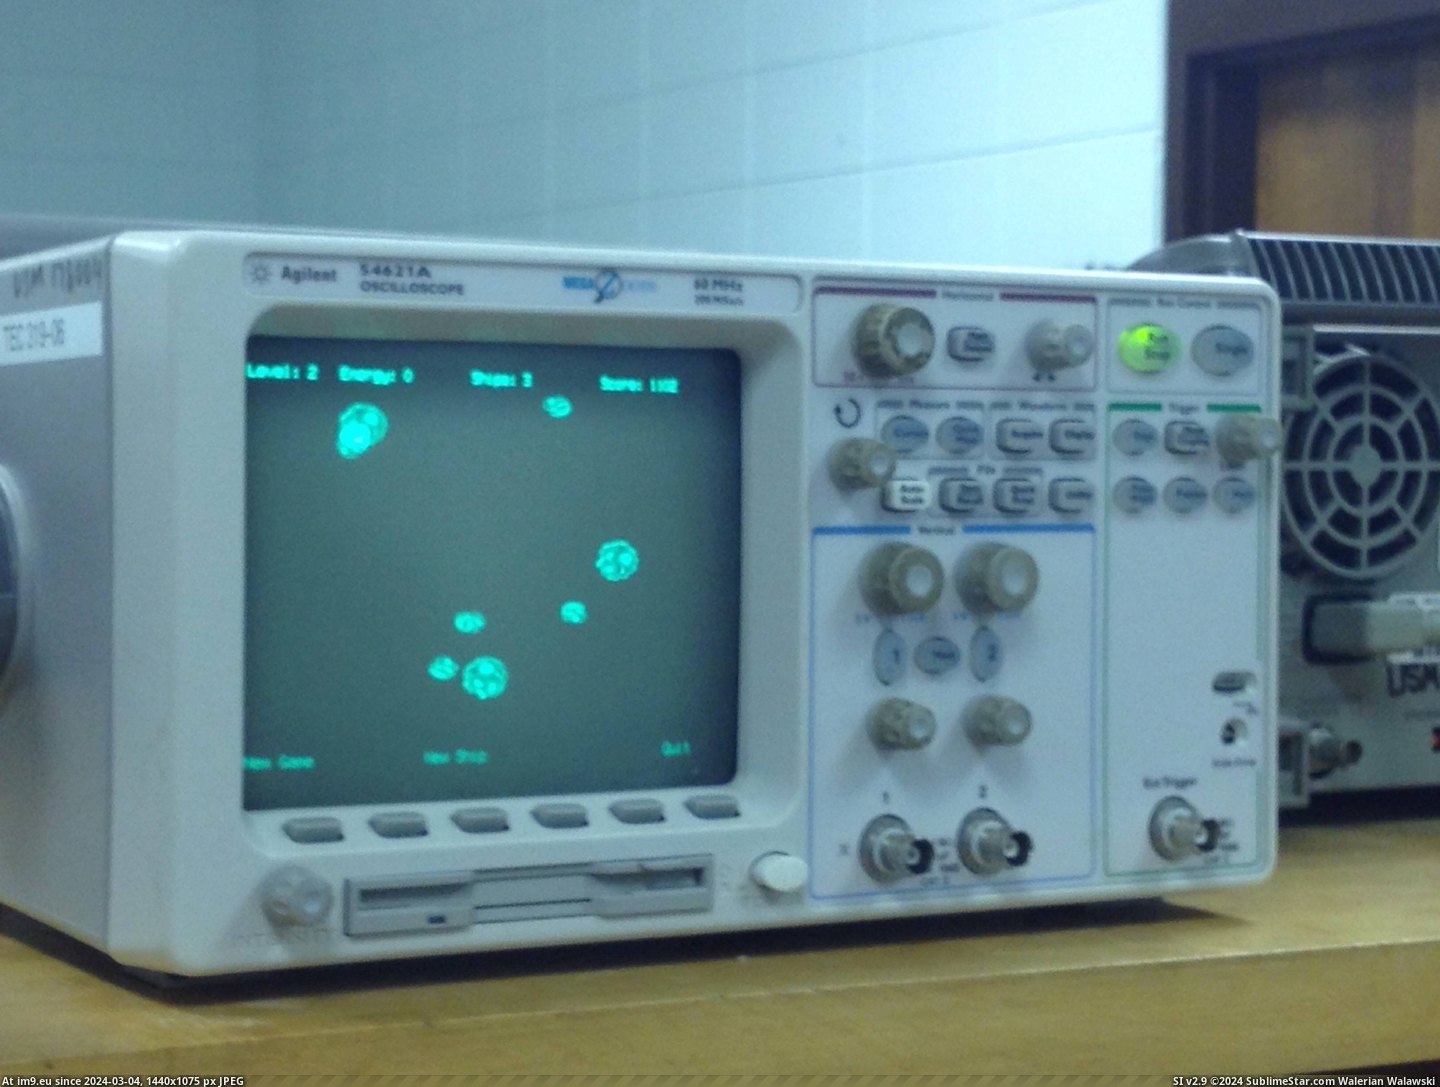 #Gaming #Lab #Oscilloscope #Electronics #Asteroids [Gaming] The Oscilloscope in our Electronics lab came with asteroids Pic. (Image of album My r/GAMING favs))